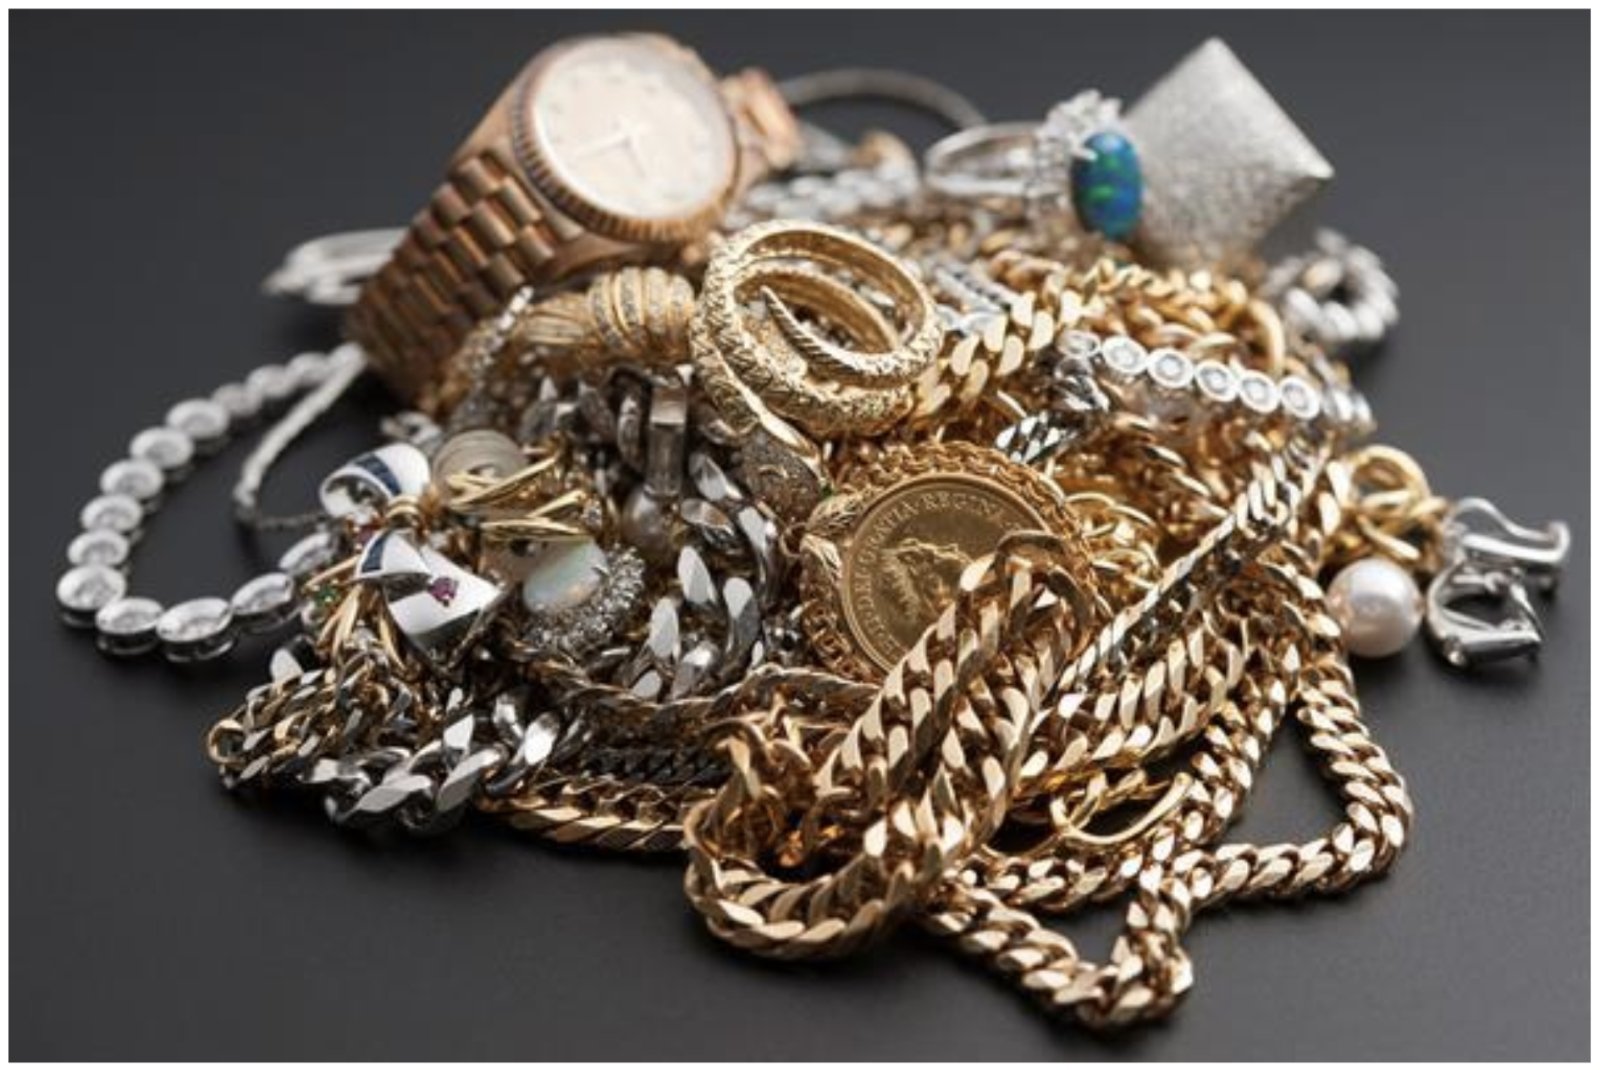 Cash for Gold - Sell Gold & Jewelry in 24hrs - Free Kit - Express Gold Cash